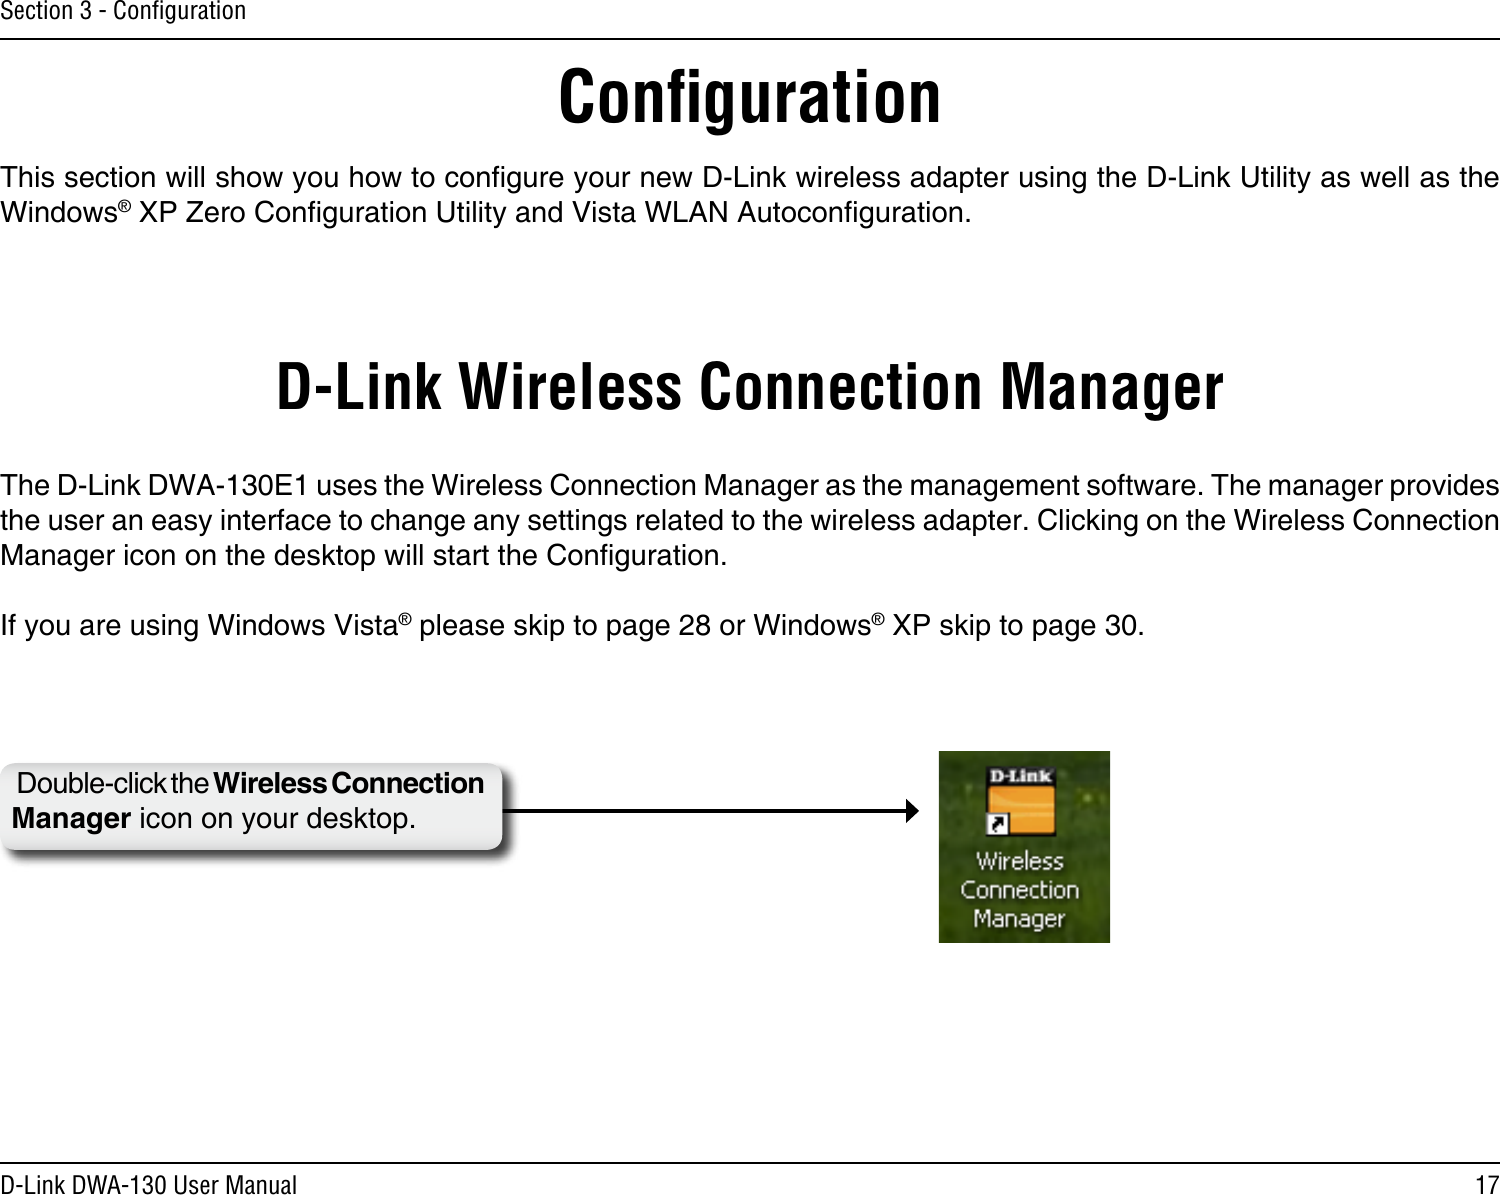 17D-Link DWA-130 User ManualSection 3 - ConﬁgurationConﬁgurationThis section will show you how to congure your new D-Link wireless adapter using the D-Link Utility as well as the Windows® XP Zero Conguration Utility and Vista WLAN Autoconguration.D-Link Wireless Connection ManagerThe D-Link DWA-130E1 uses the Wireless Connection Manager as the management software. The manager provides the user an easy interface to change any settings related to the wireless adapter. Clicking on the Wireless Connection Manager icon on the desktop will start the Conguration.If you are using Windows Vista® please skip to page 28 or Windows® XP skip to page 30.Double-click the Wireless Connection Manager icon on your desktop.